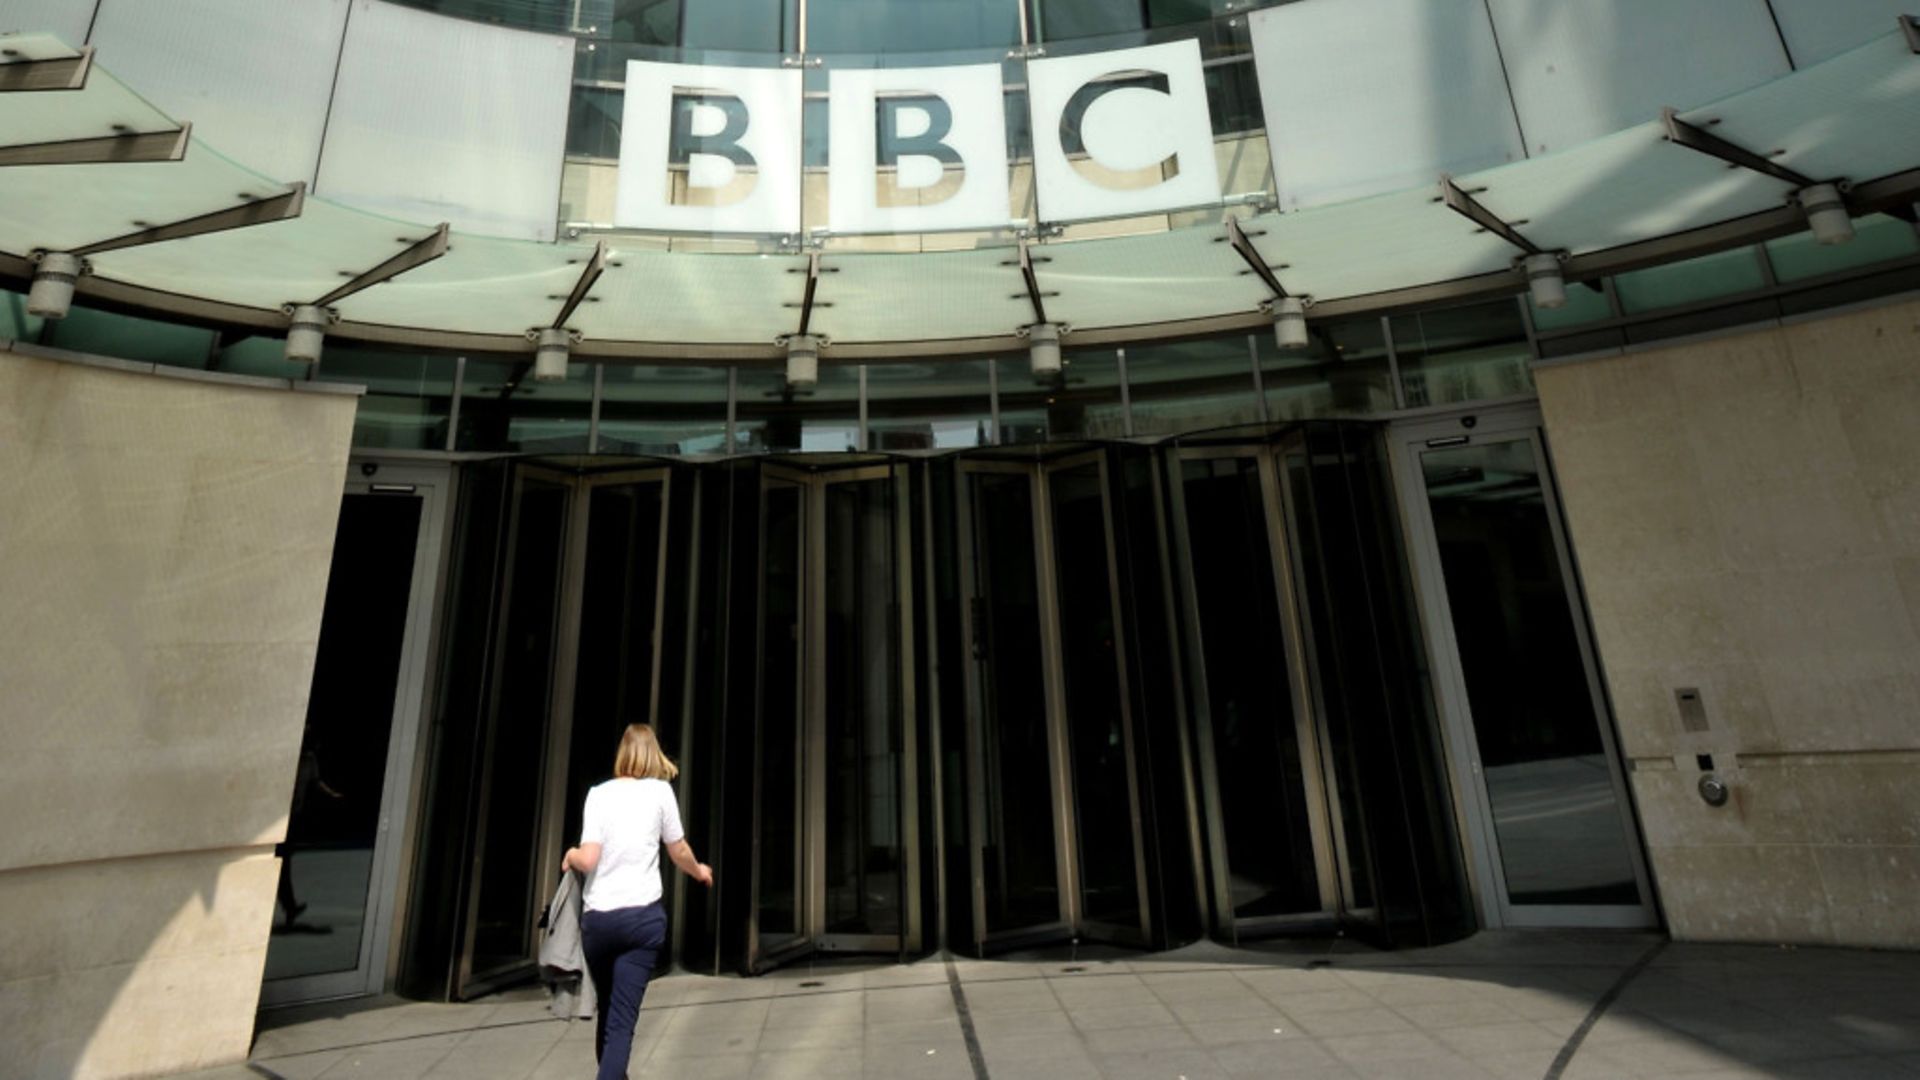 BBC Broadcasting House in London - Credit: PA Wire/PA Images